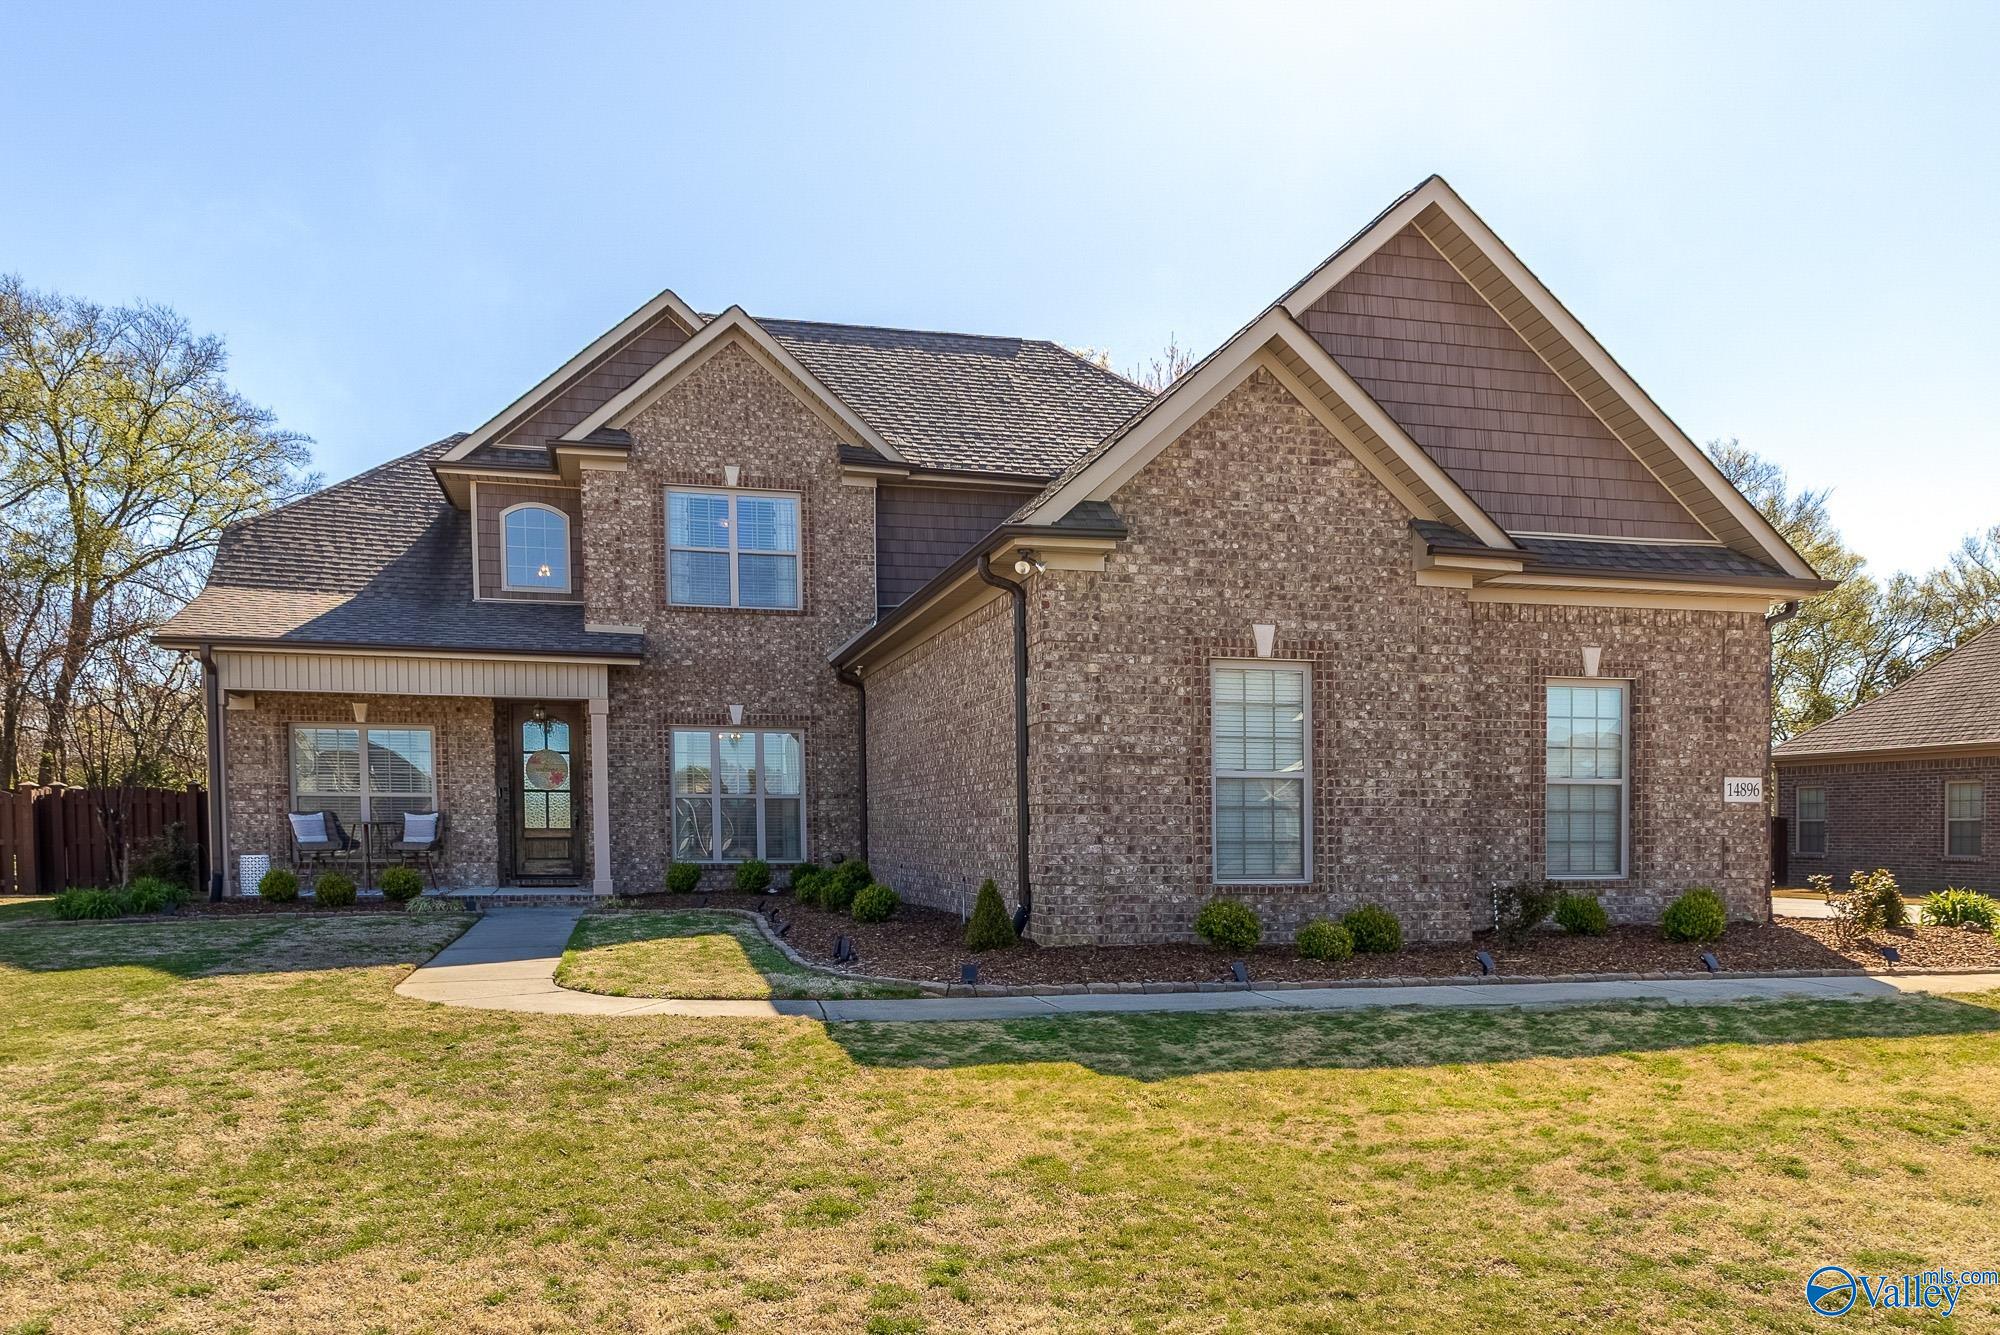 Property: 14896 Commonwealth Drive,Athens, AL